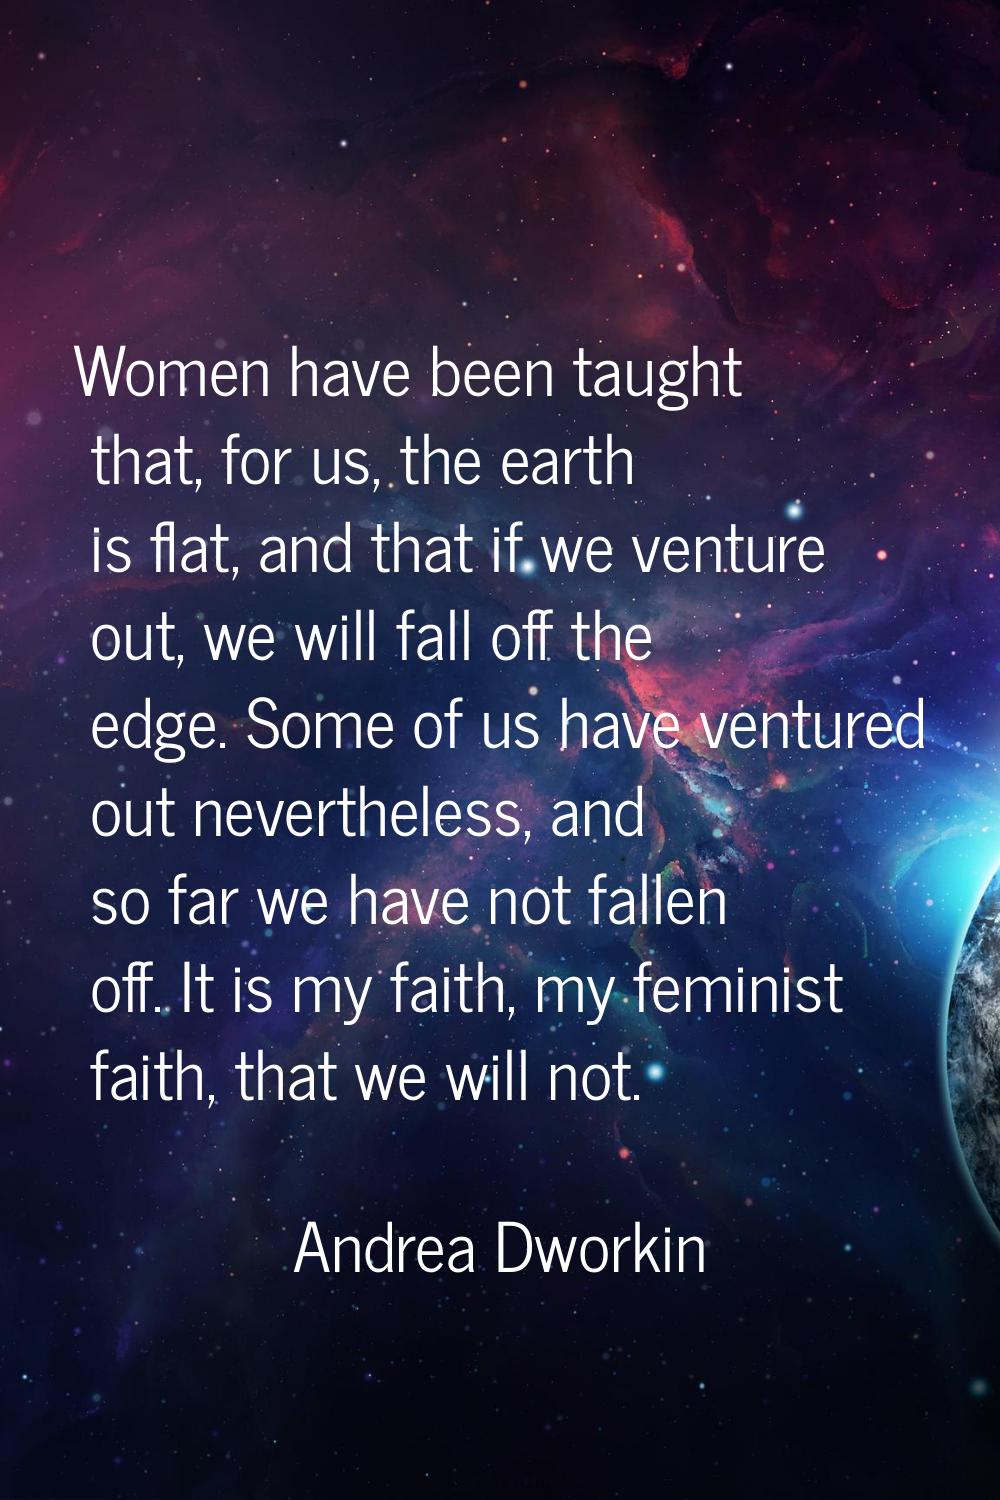 Women have been taught that, for us, the earth is flat, and that if we venture out, we will fall of